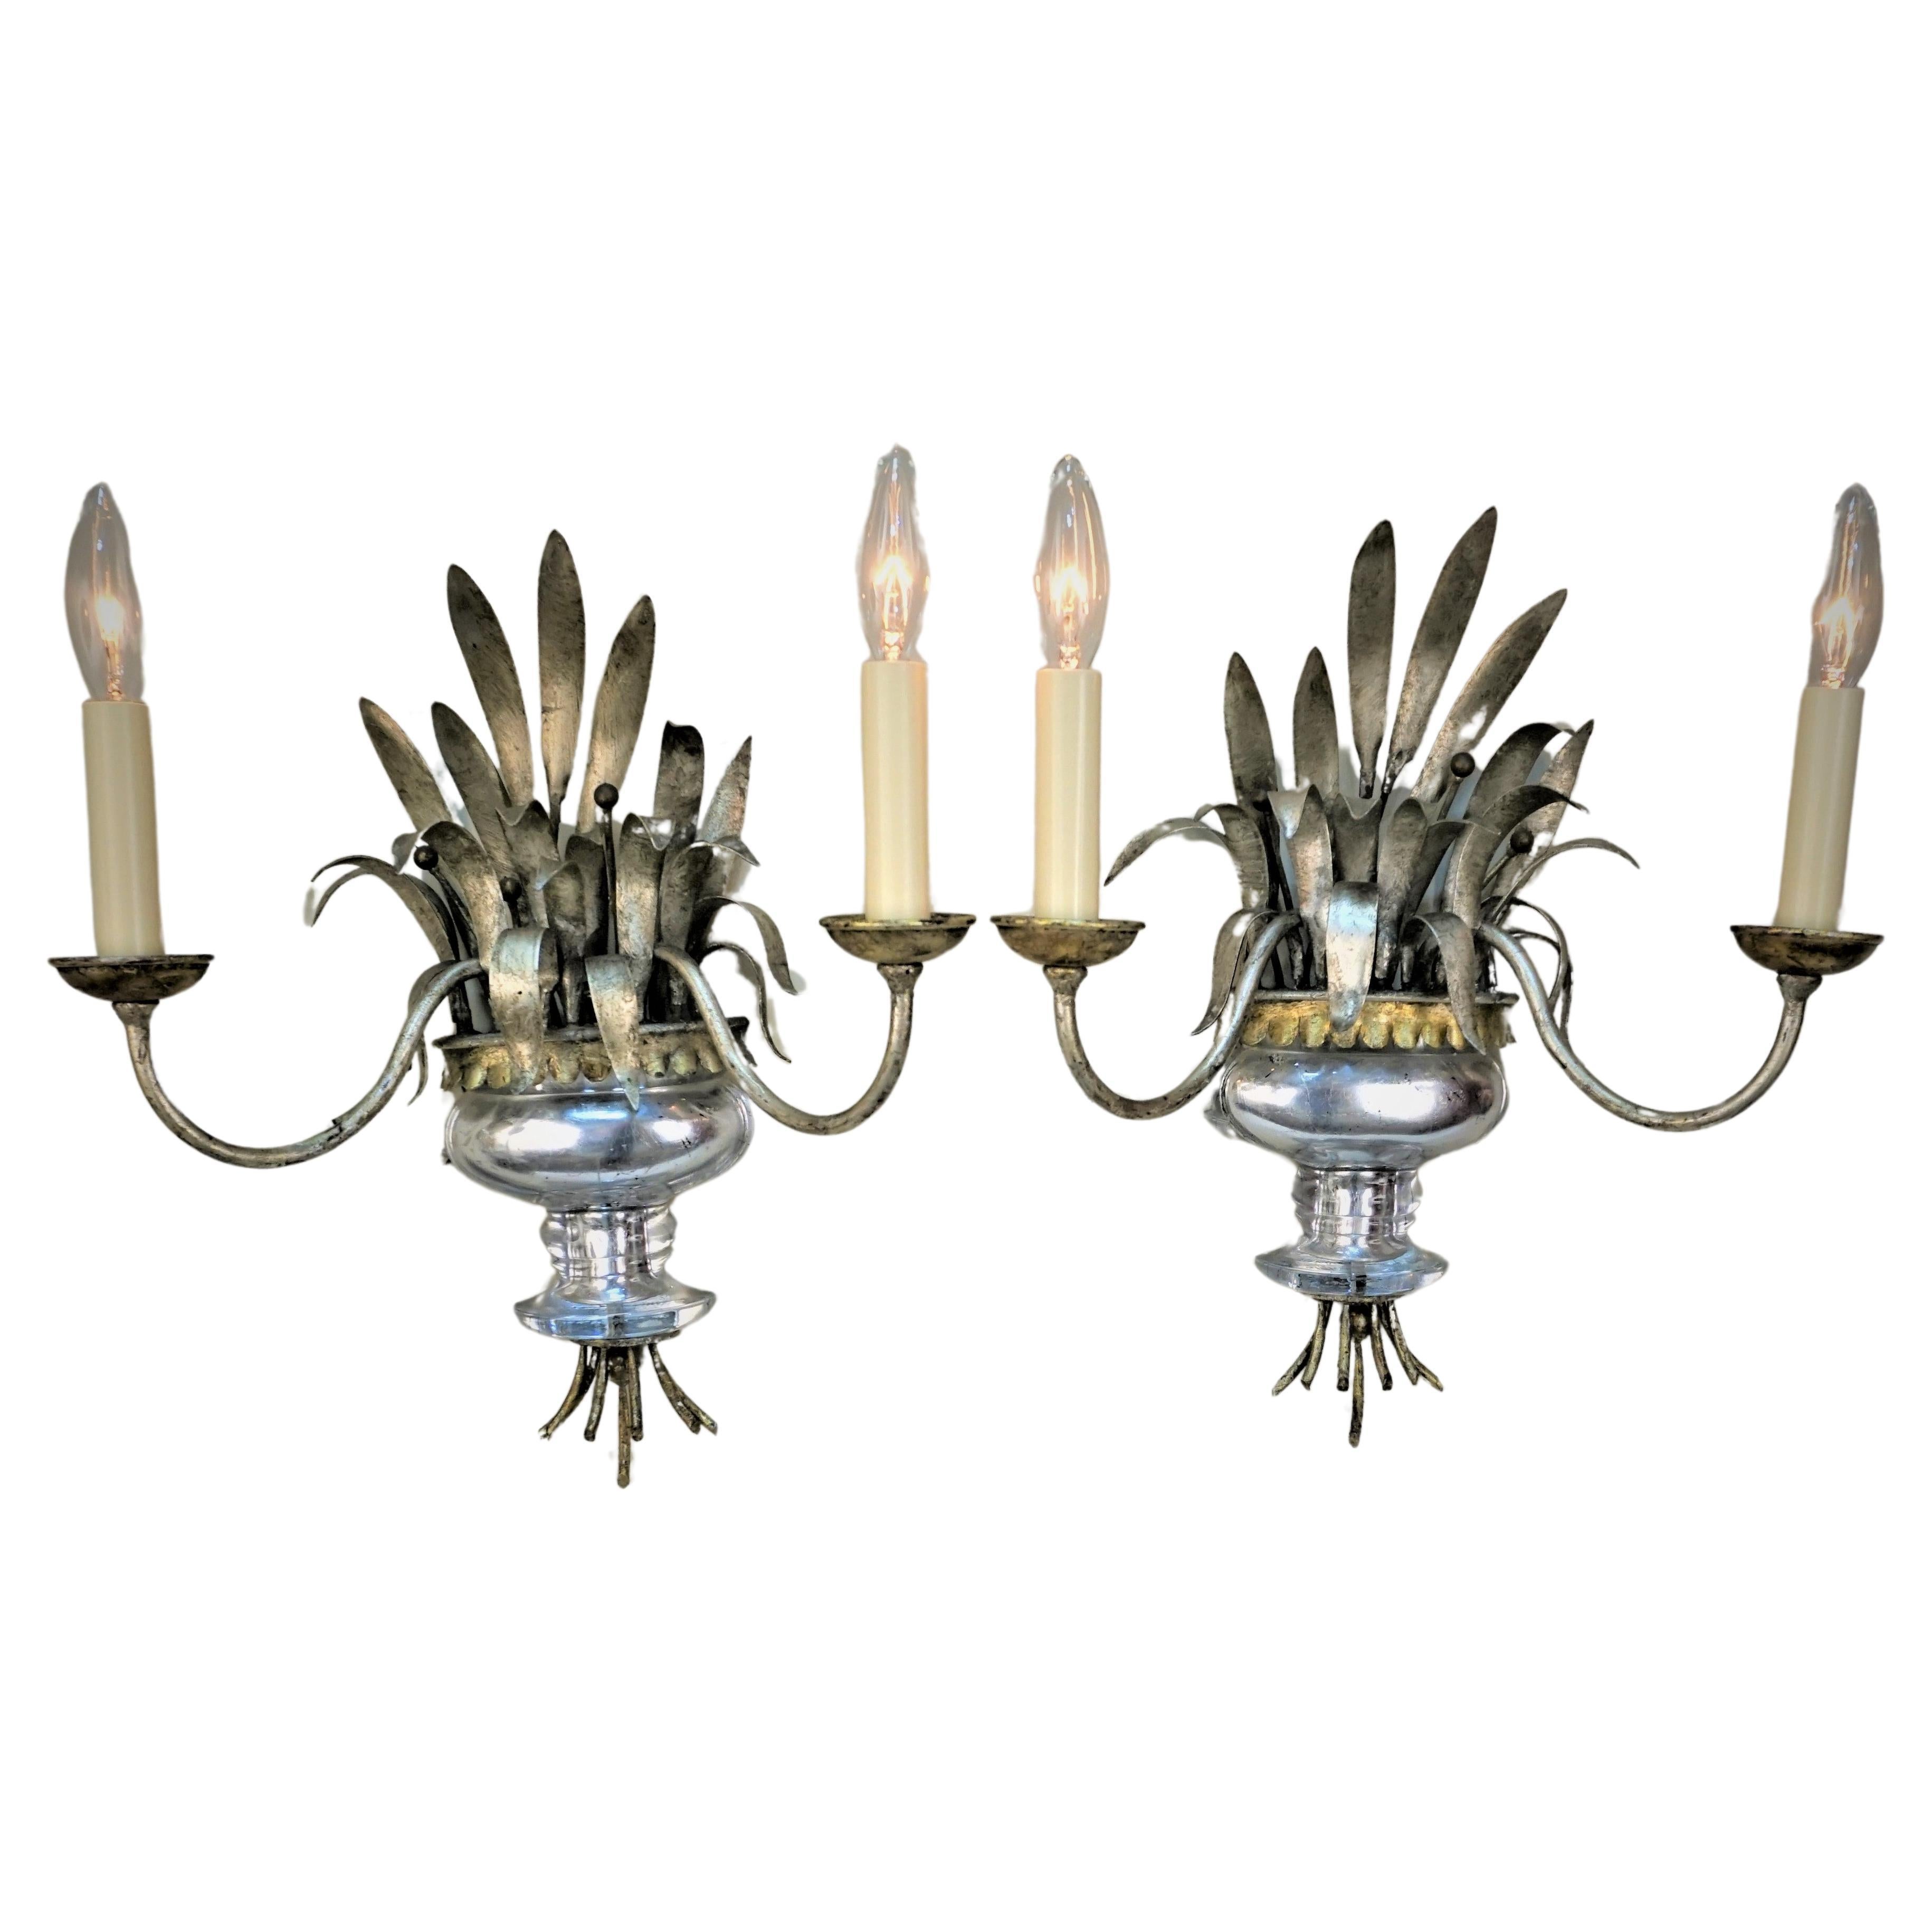  Pair of 1950's French Maison Bagues Wall Sconce For Sale